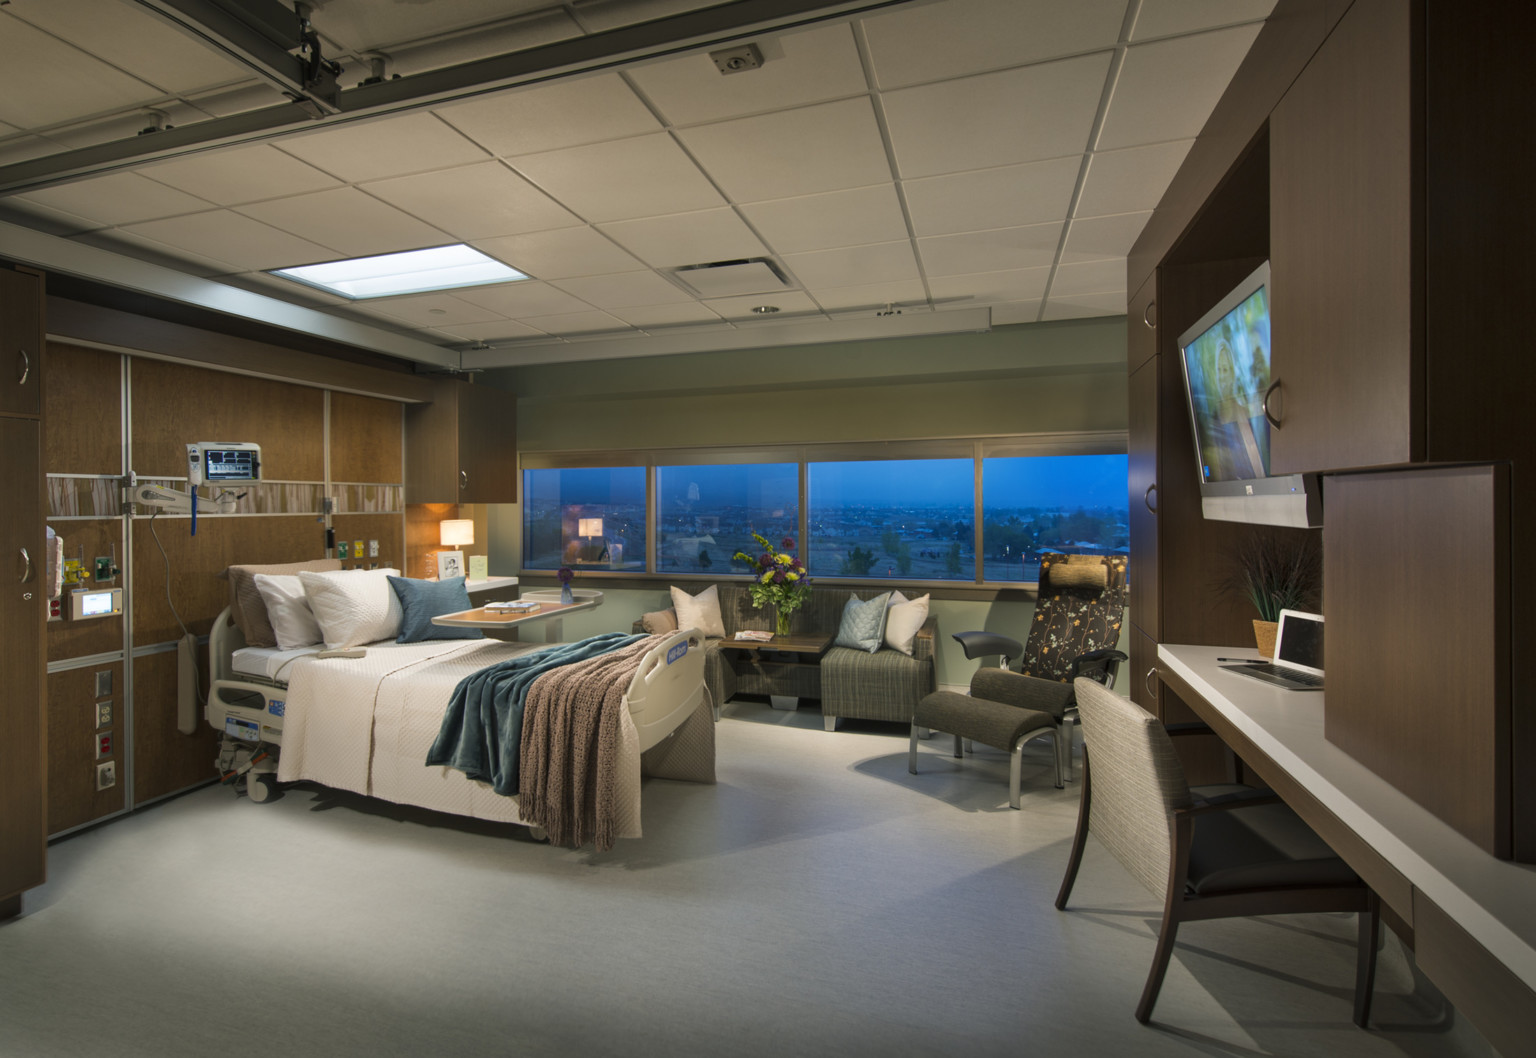 patient room with wood finish walls, floral and neutral colored upholstered guest seating. Exterior wall lined with windows